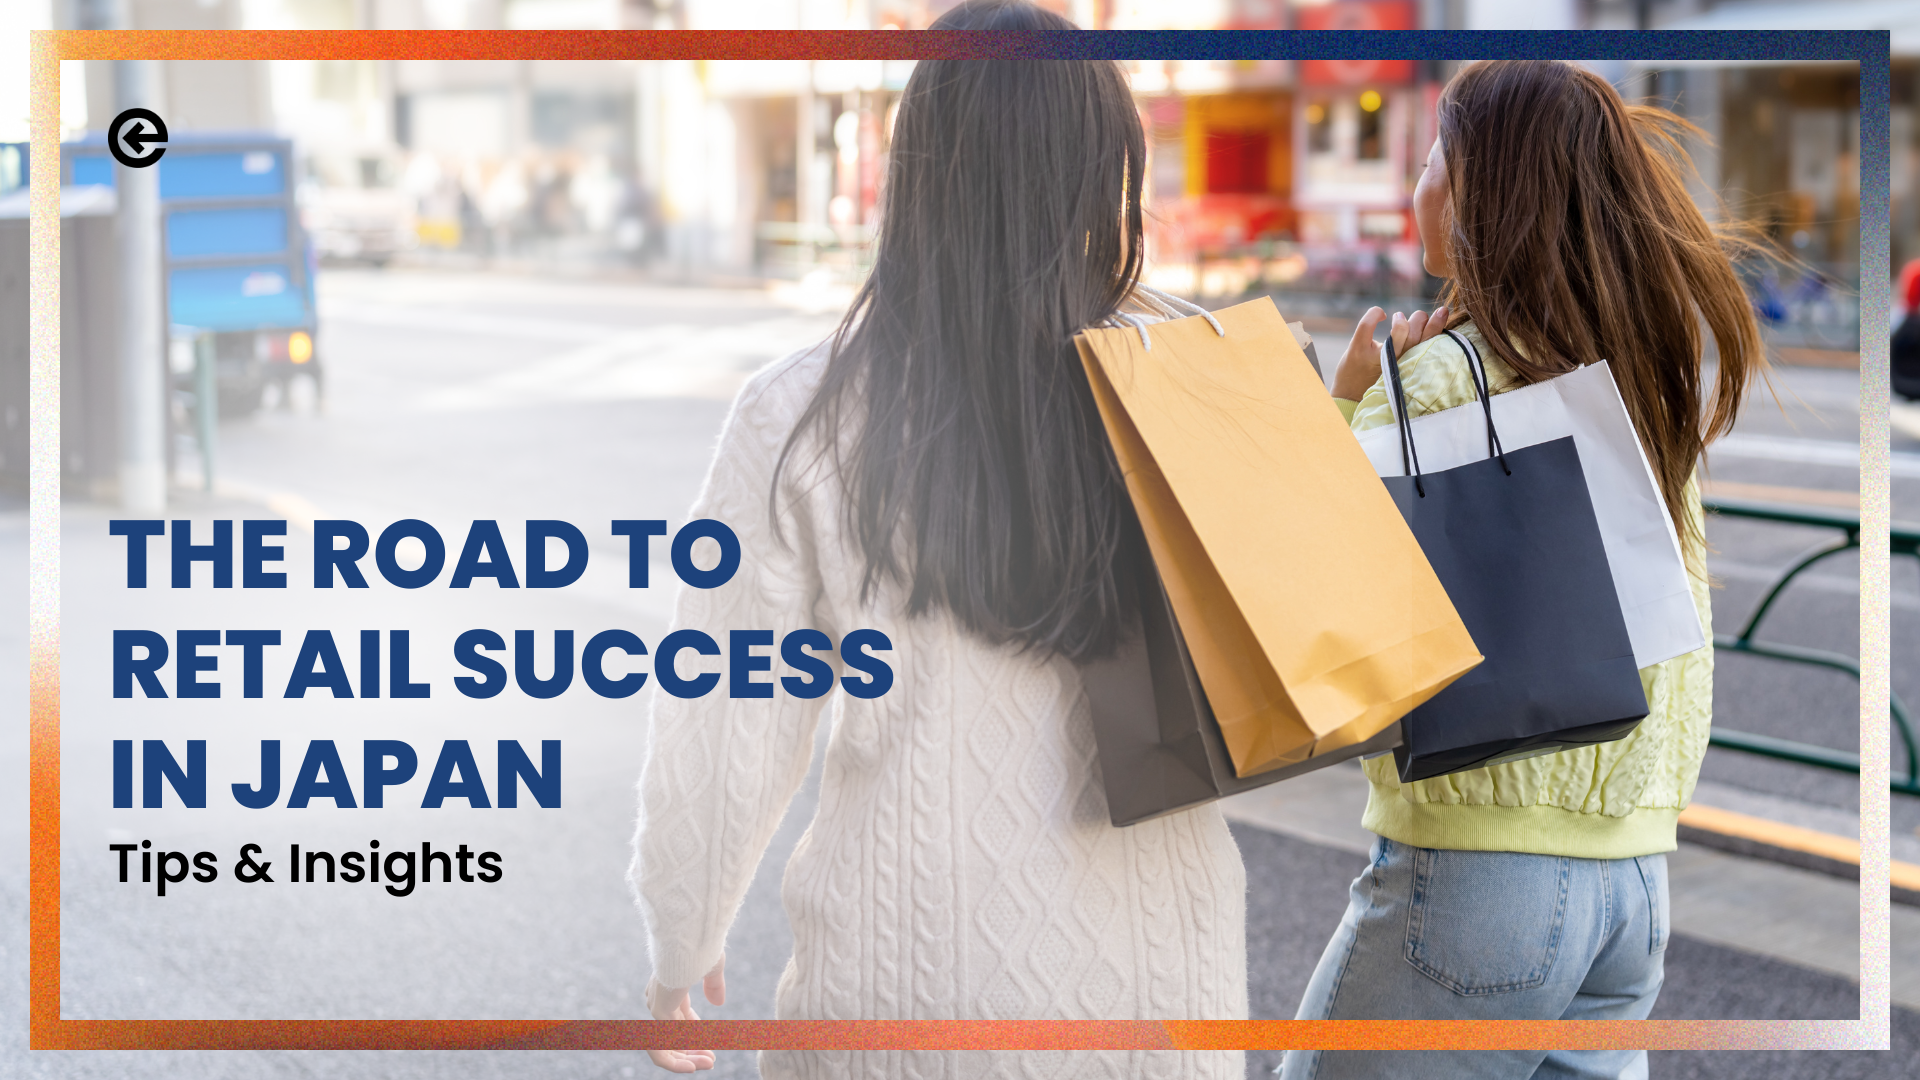 Retail Success in Japan: Tips & Insights